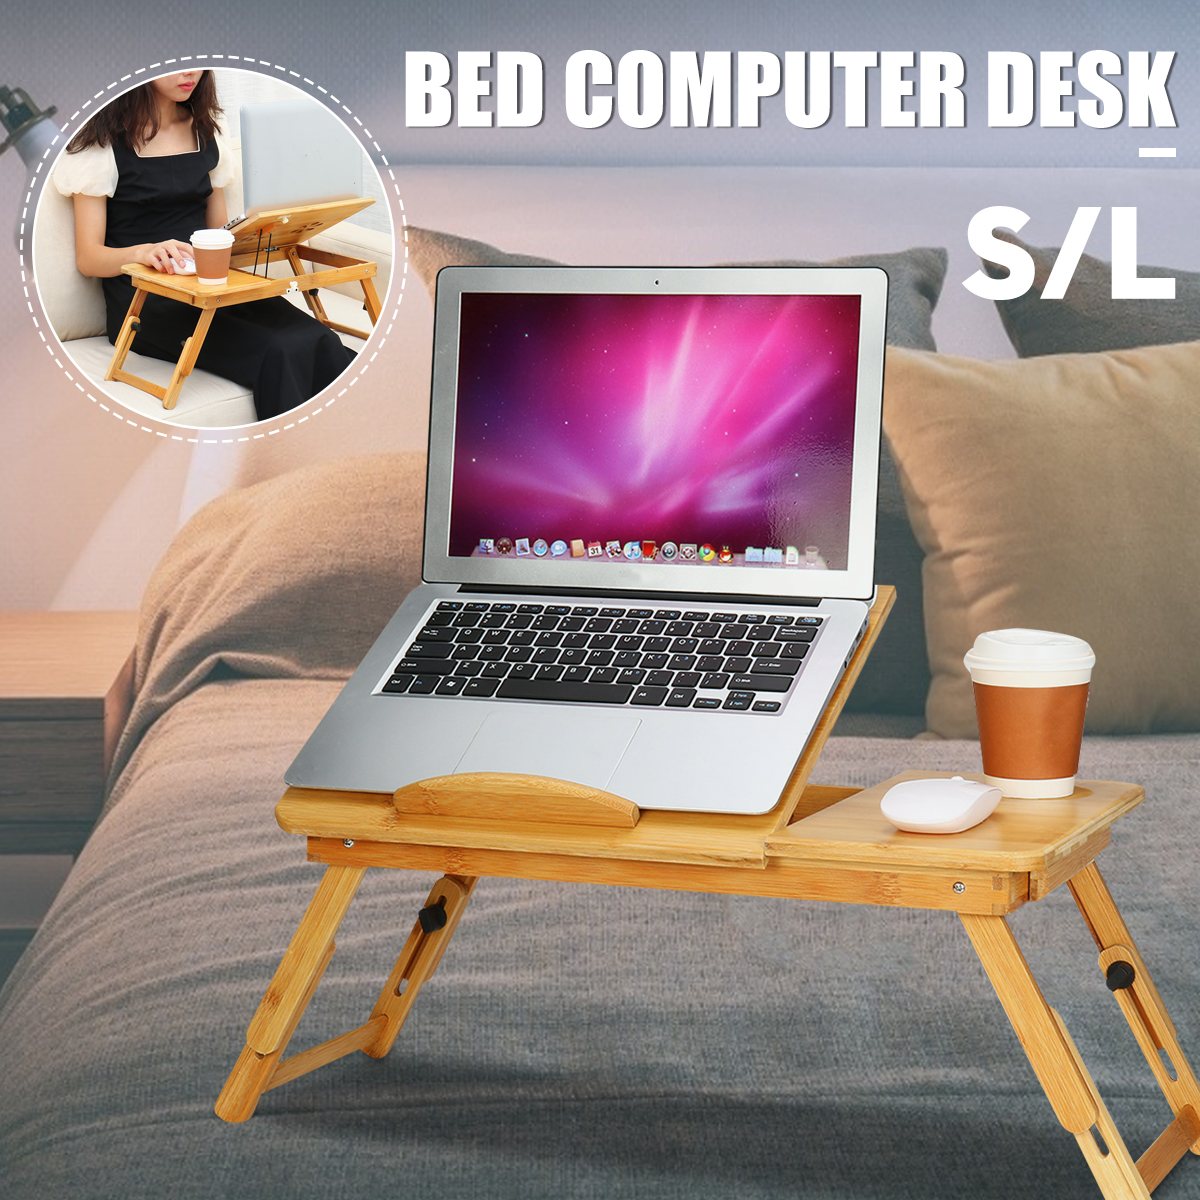 Portable-Bamboo-Laptop-Bed-Desk-Table-Foldable-Workstation-Tray-Lap-Fold-1719036-5